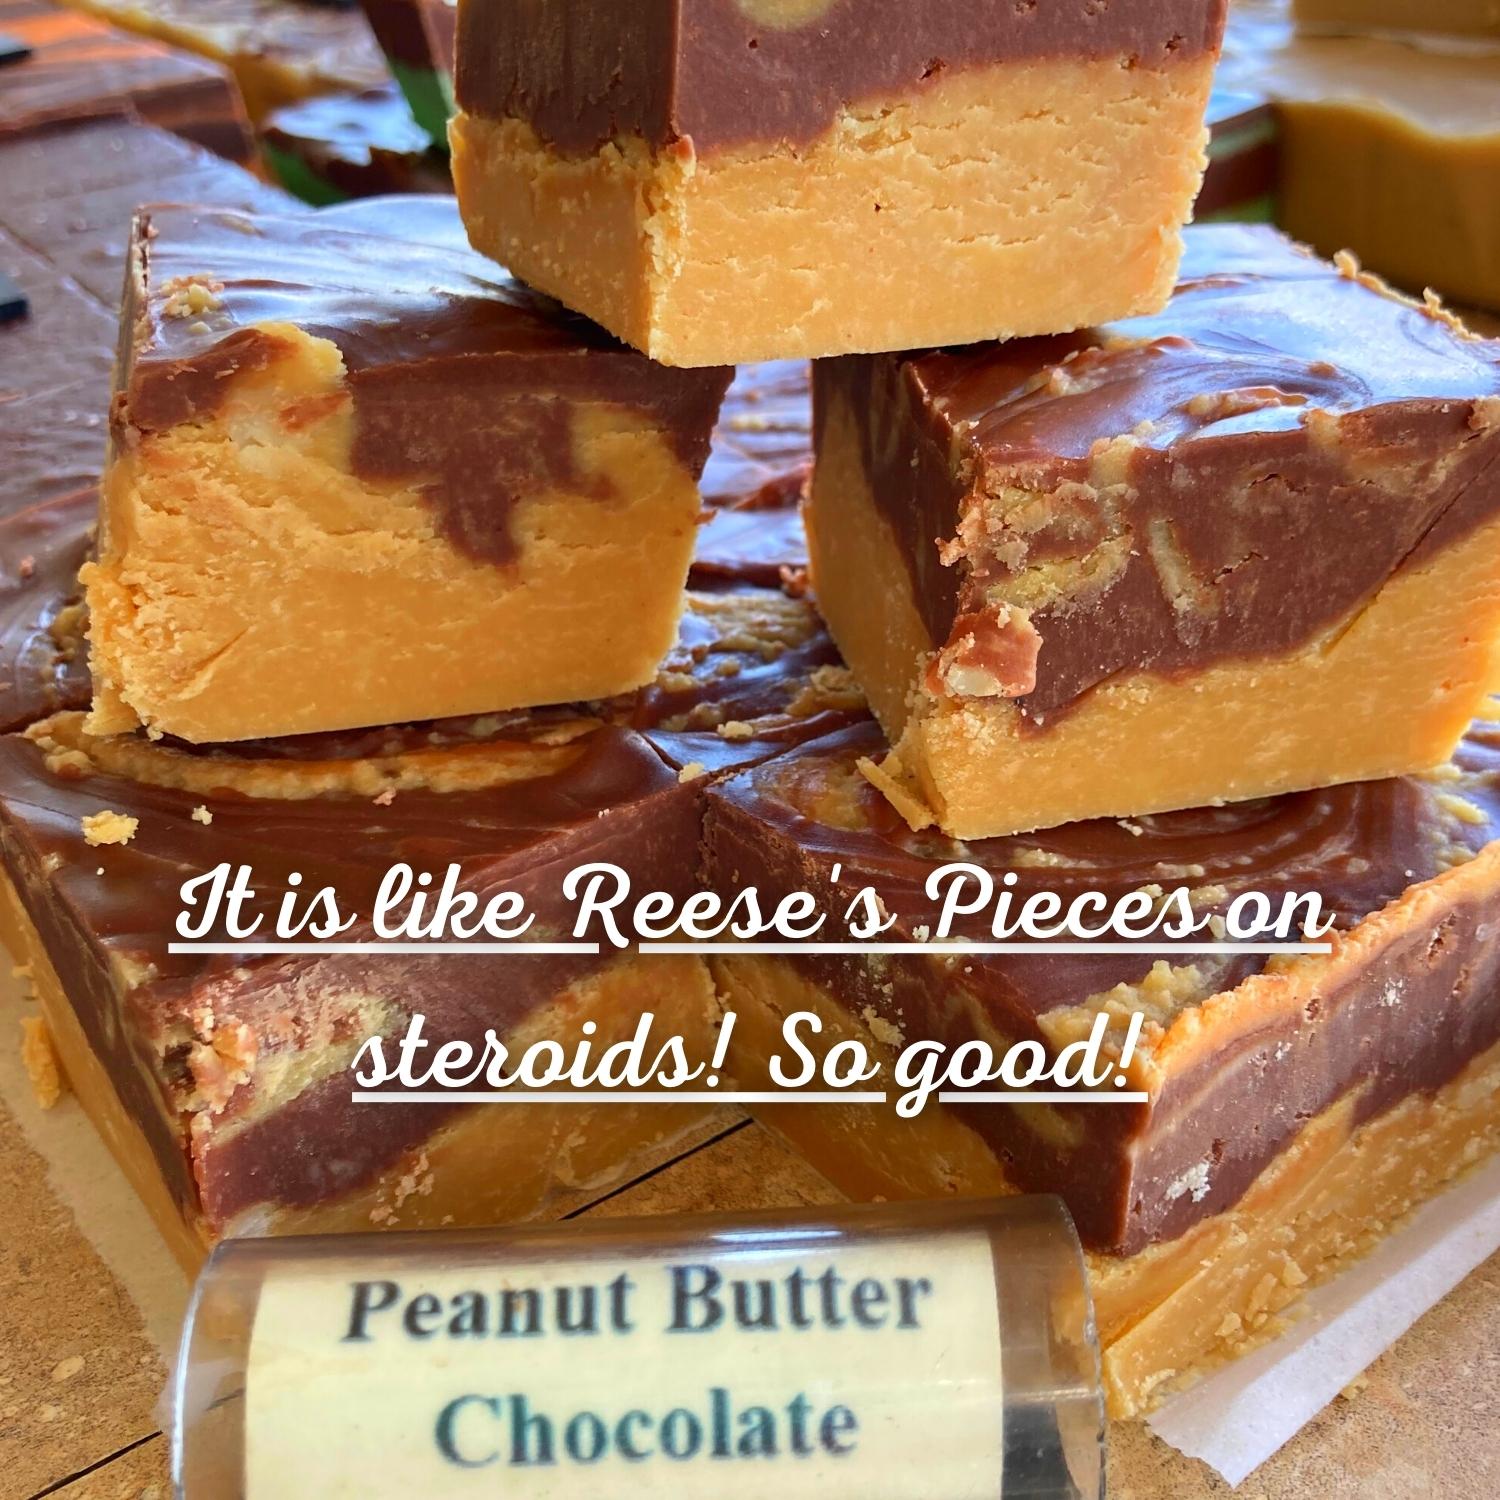 Peanut Butter Chocolate Fudge One of my staff said this is like Reese's Pieces on steroids! So good!